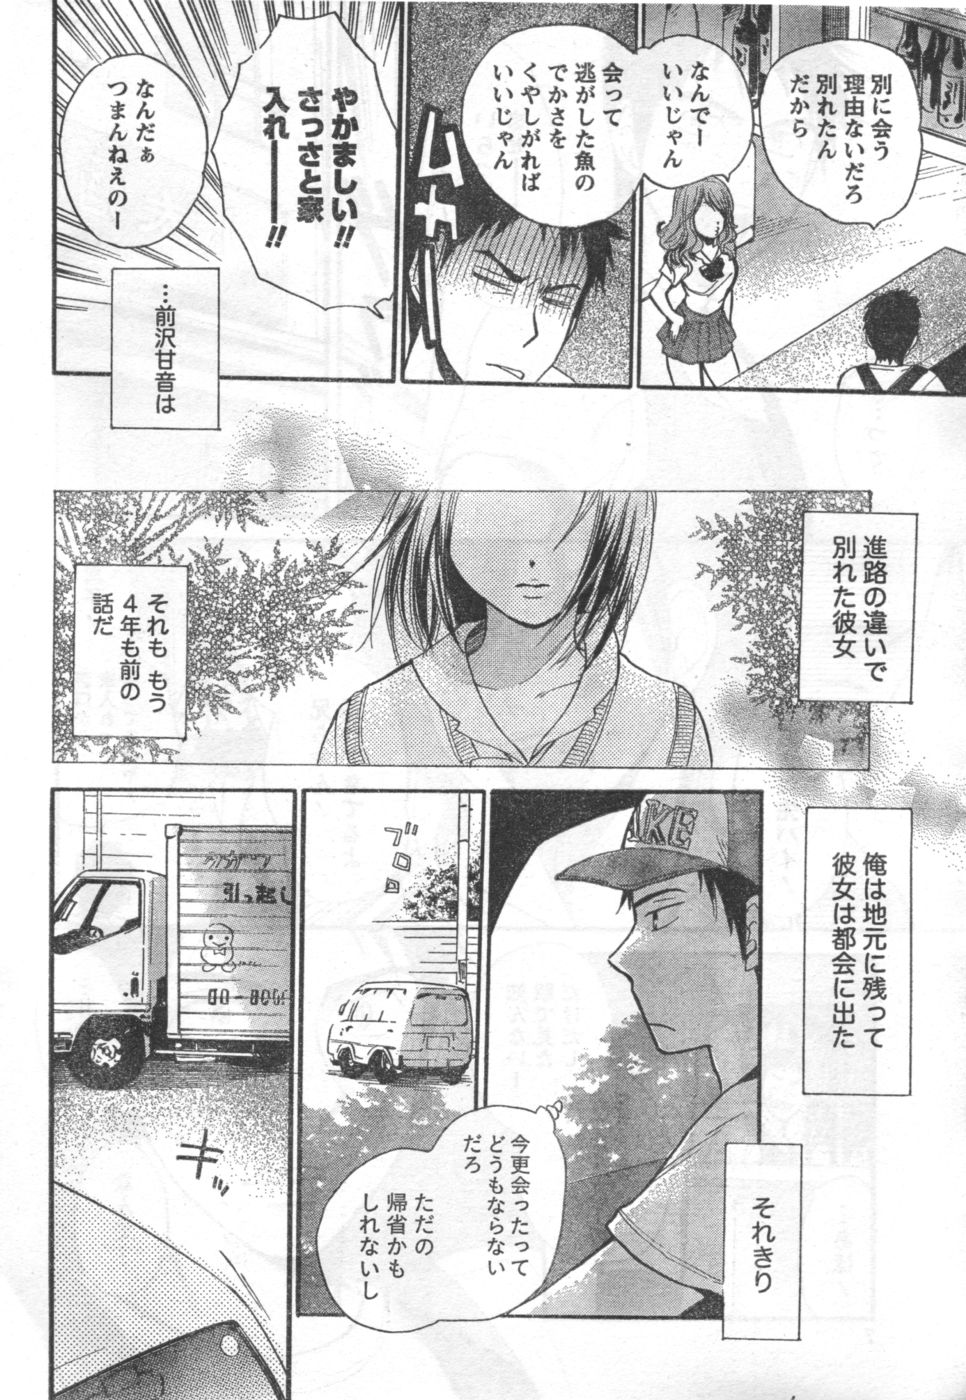 Monthly Vitaman 2006-12 page 7 full